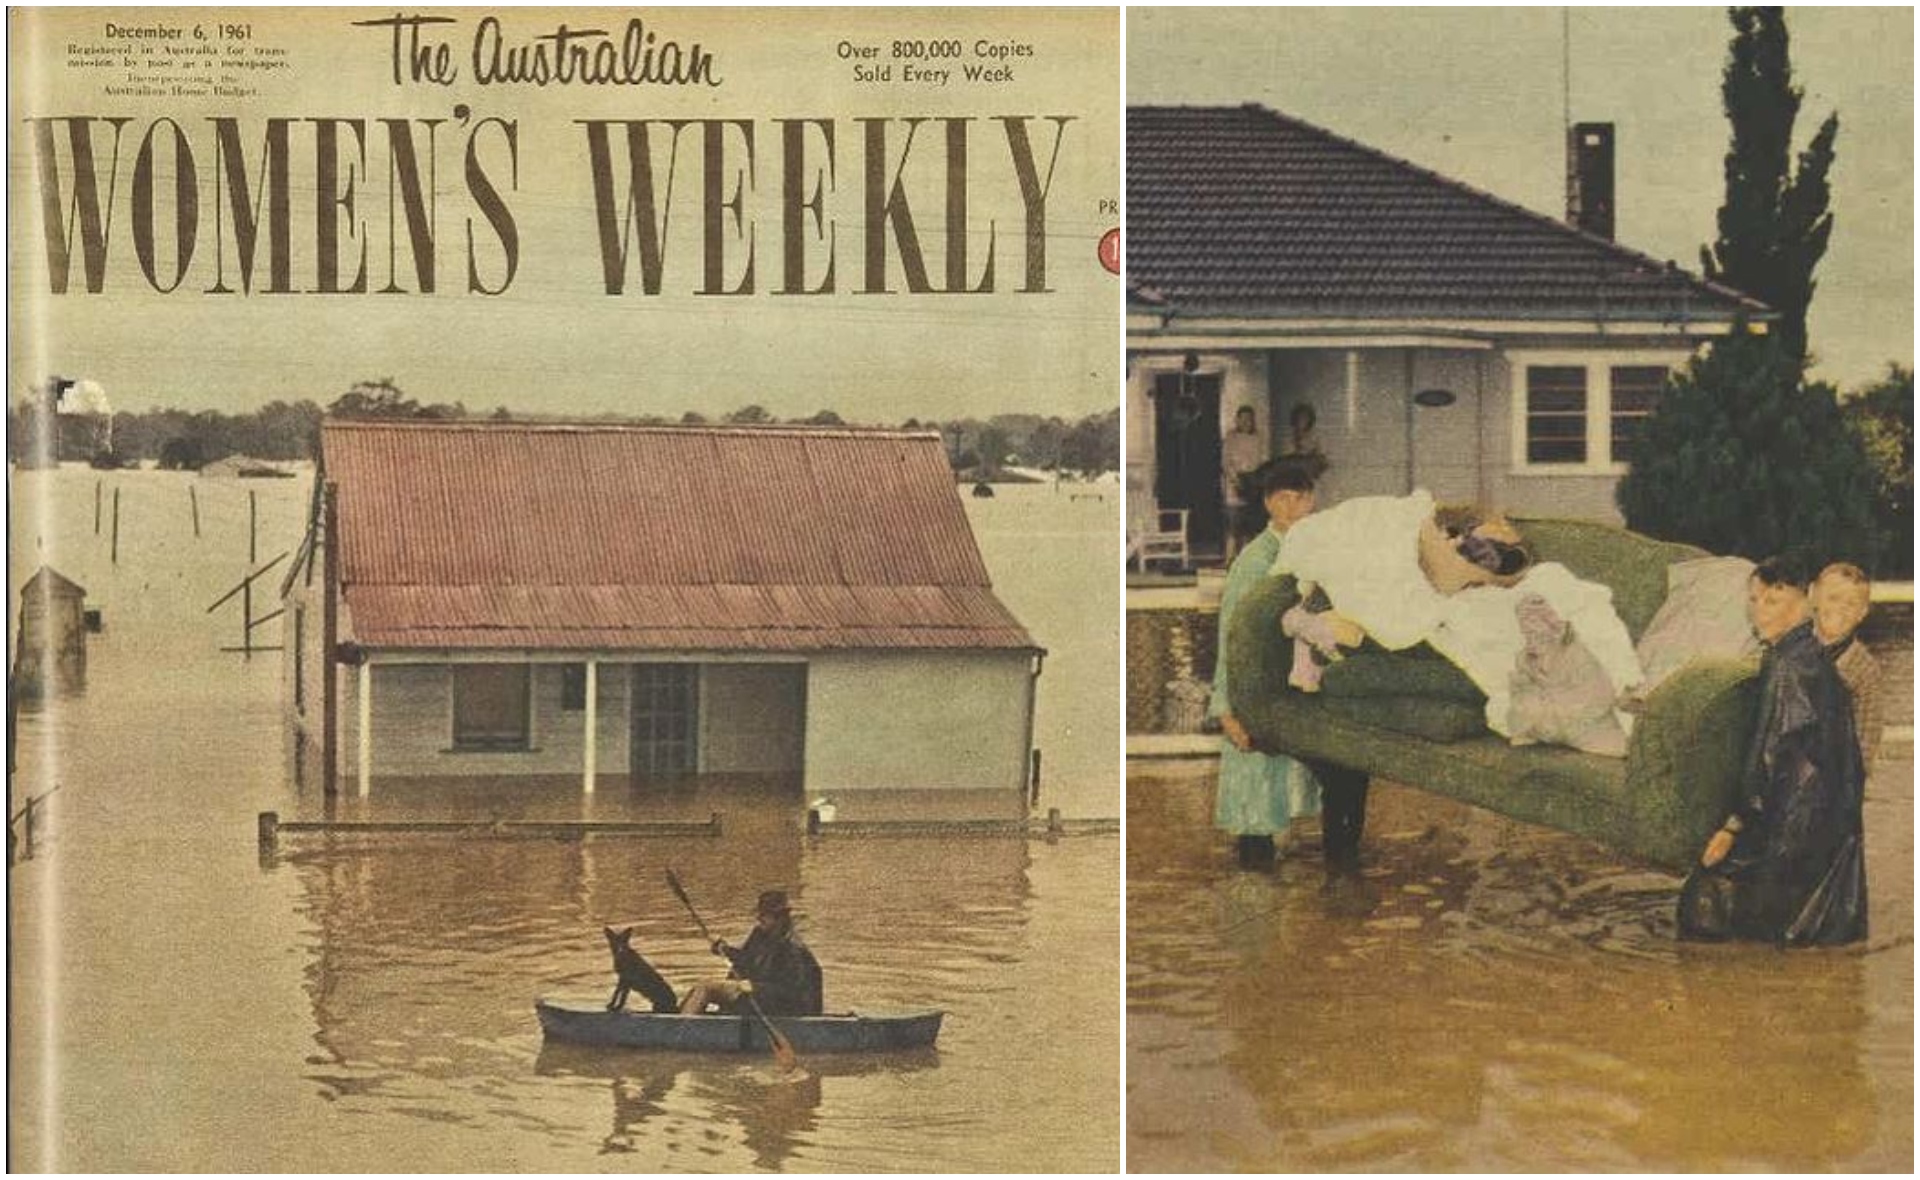 “When the rains came”: This heartbreaking 1960s Women’s Weekly cover story is a tragic mirror image of New South Wales right now